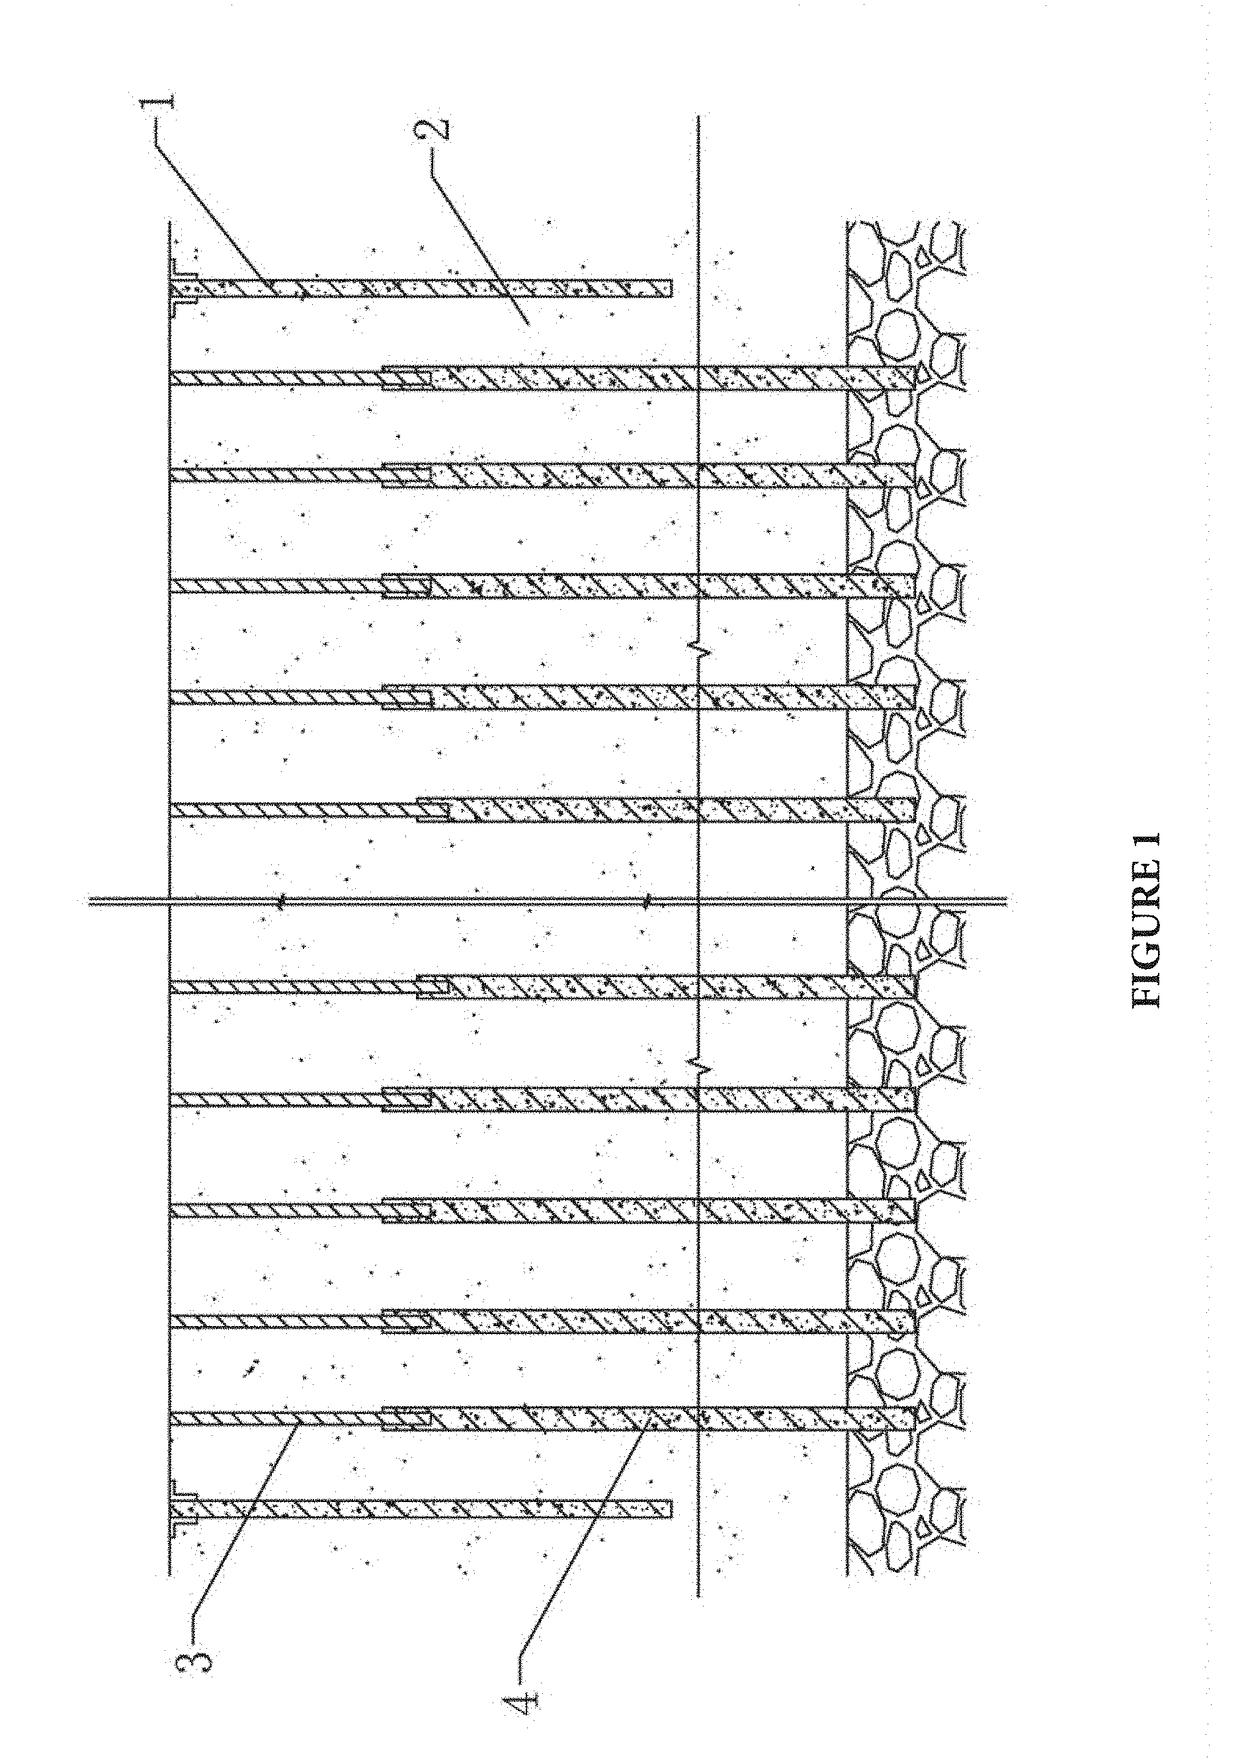 Inverse construction method for deep, large and long pit assembling structure of suspension-type envelope enclosure